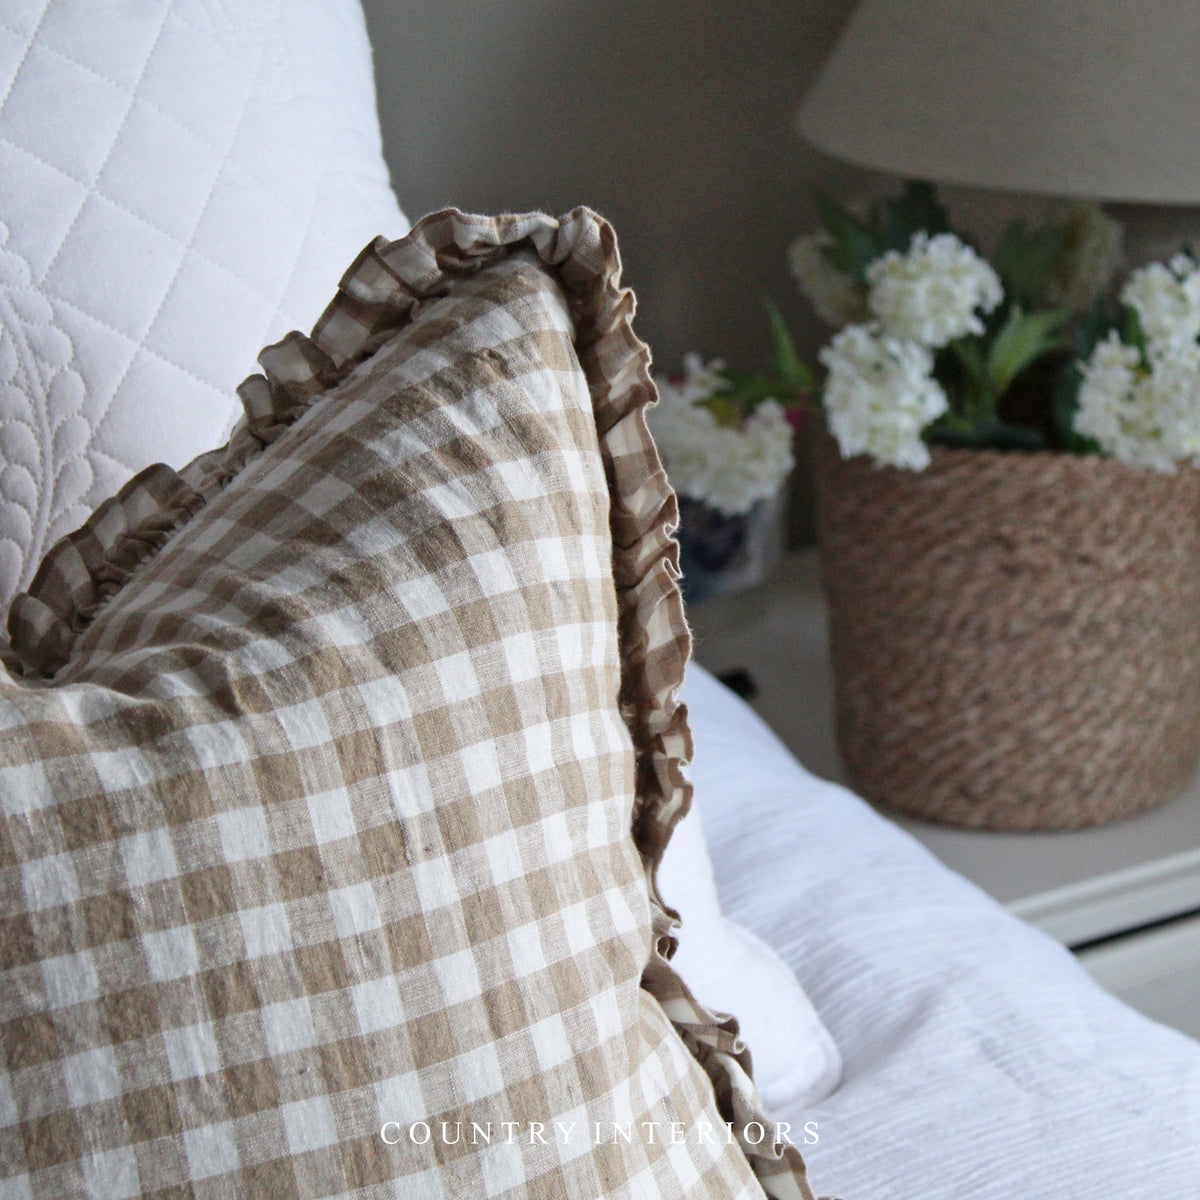 Natural Gingham Ruffle Cushion Feather Inner